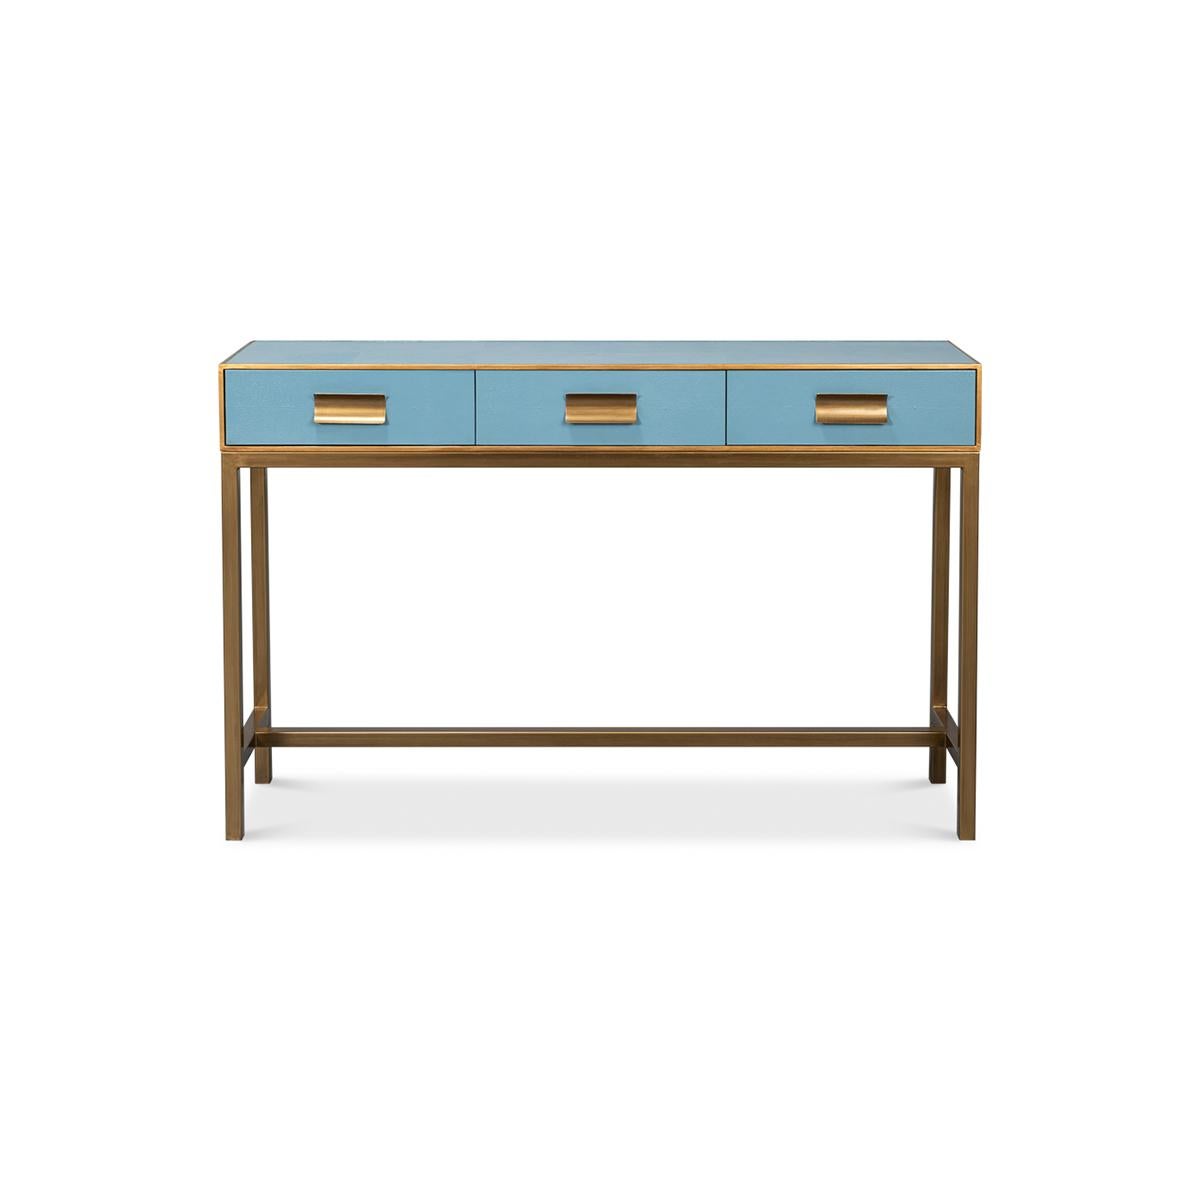 This piece, beautifully crafted with a luxurious leather exterior in a serene chambray blue, is accentuated with delicate gilt trim, adding a hint of glamour to its modern design. The console measures 54